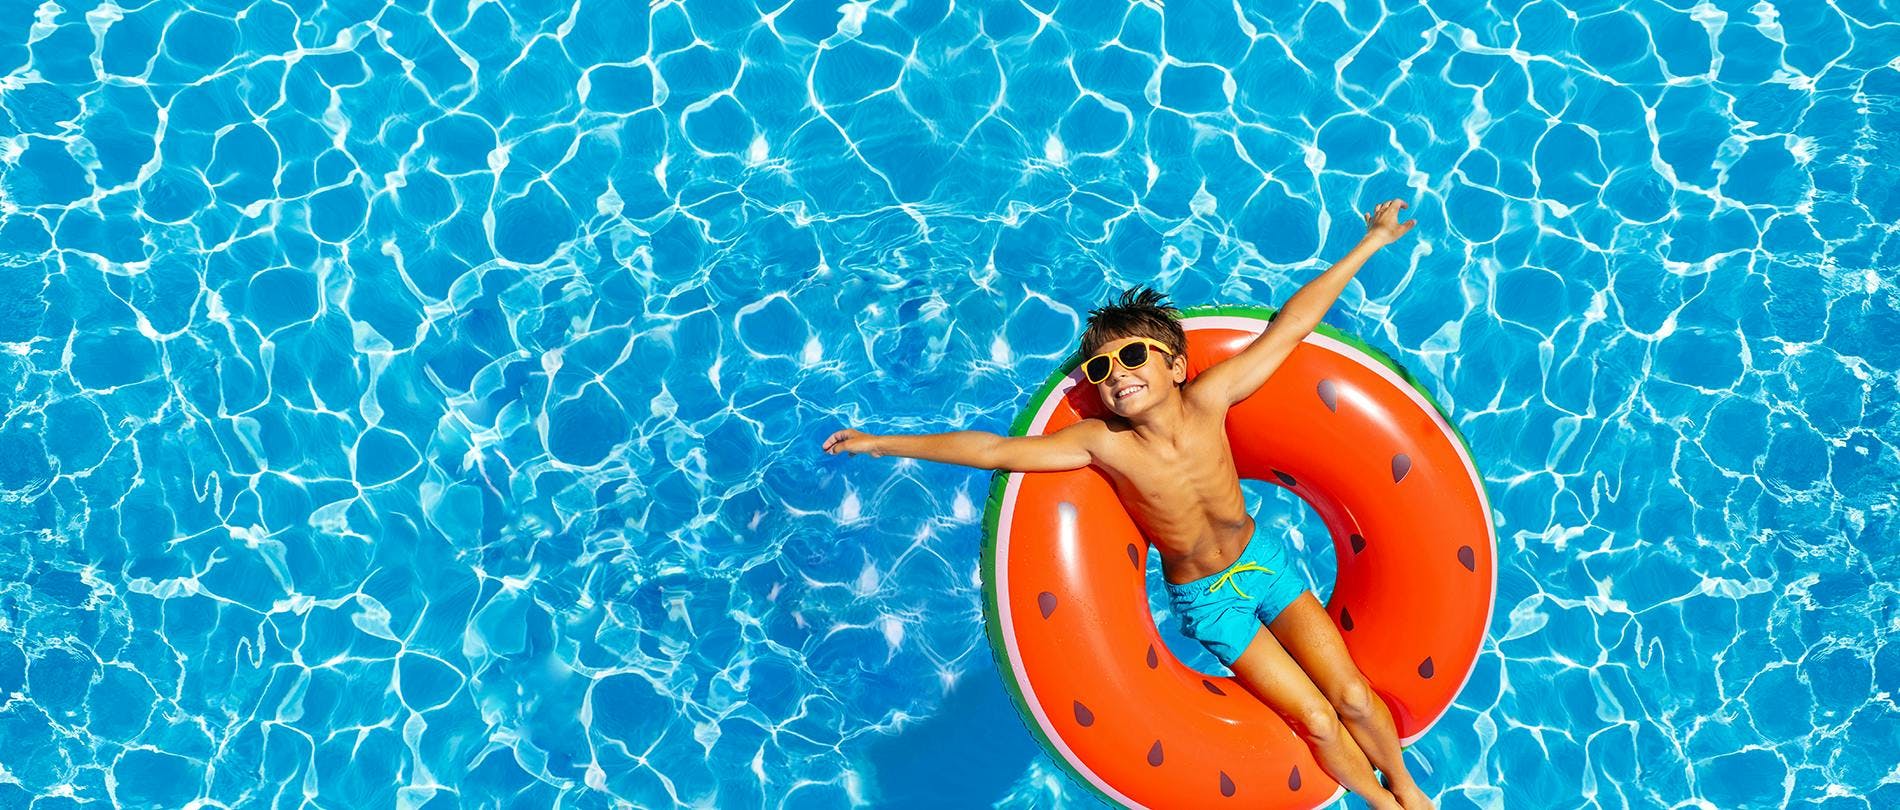 Free vs Combined Chlorine Image of Boy in Pool